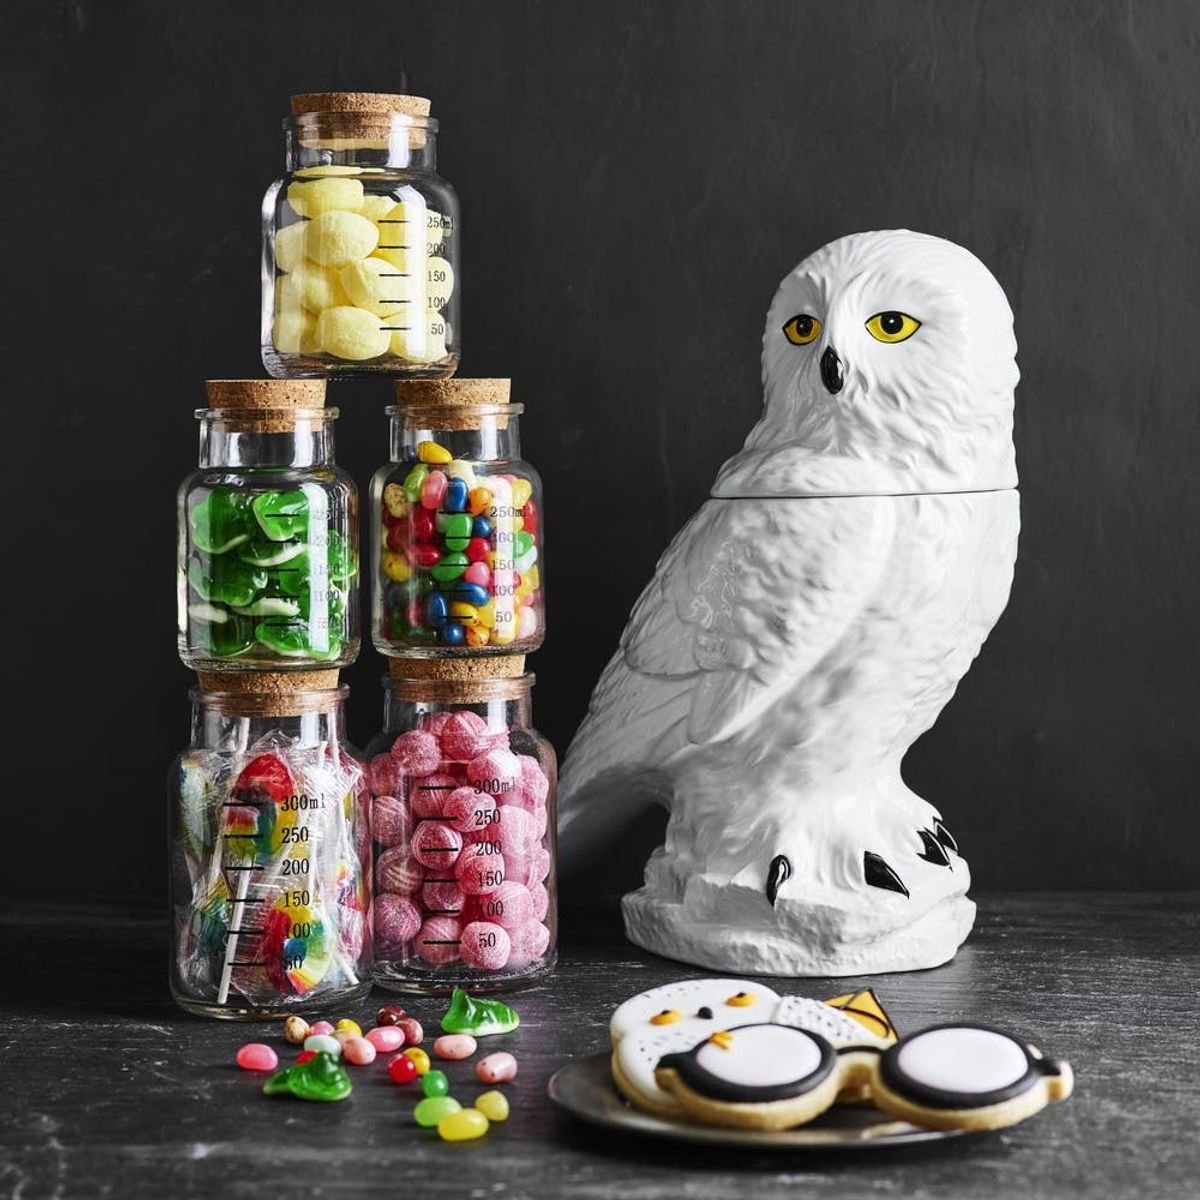 Williams-Sonoma’s New Harry Potter Kitchen Collection Is Totally Magical